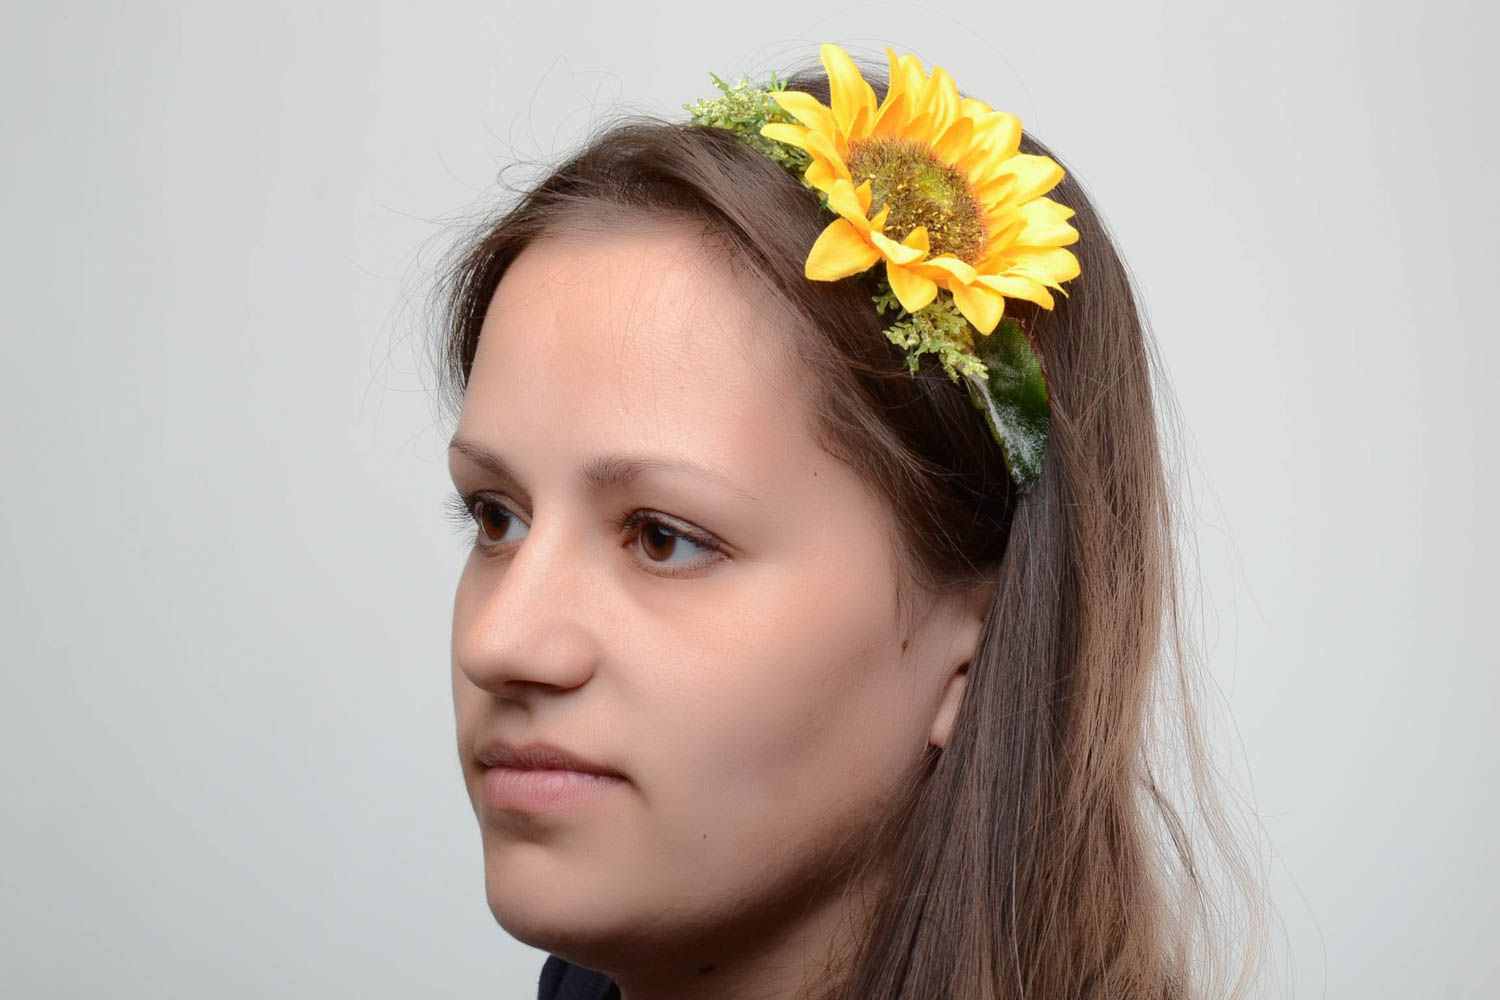 Handmade decorative summer headband woven of green ribbons with large sunflower photo 5